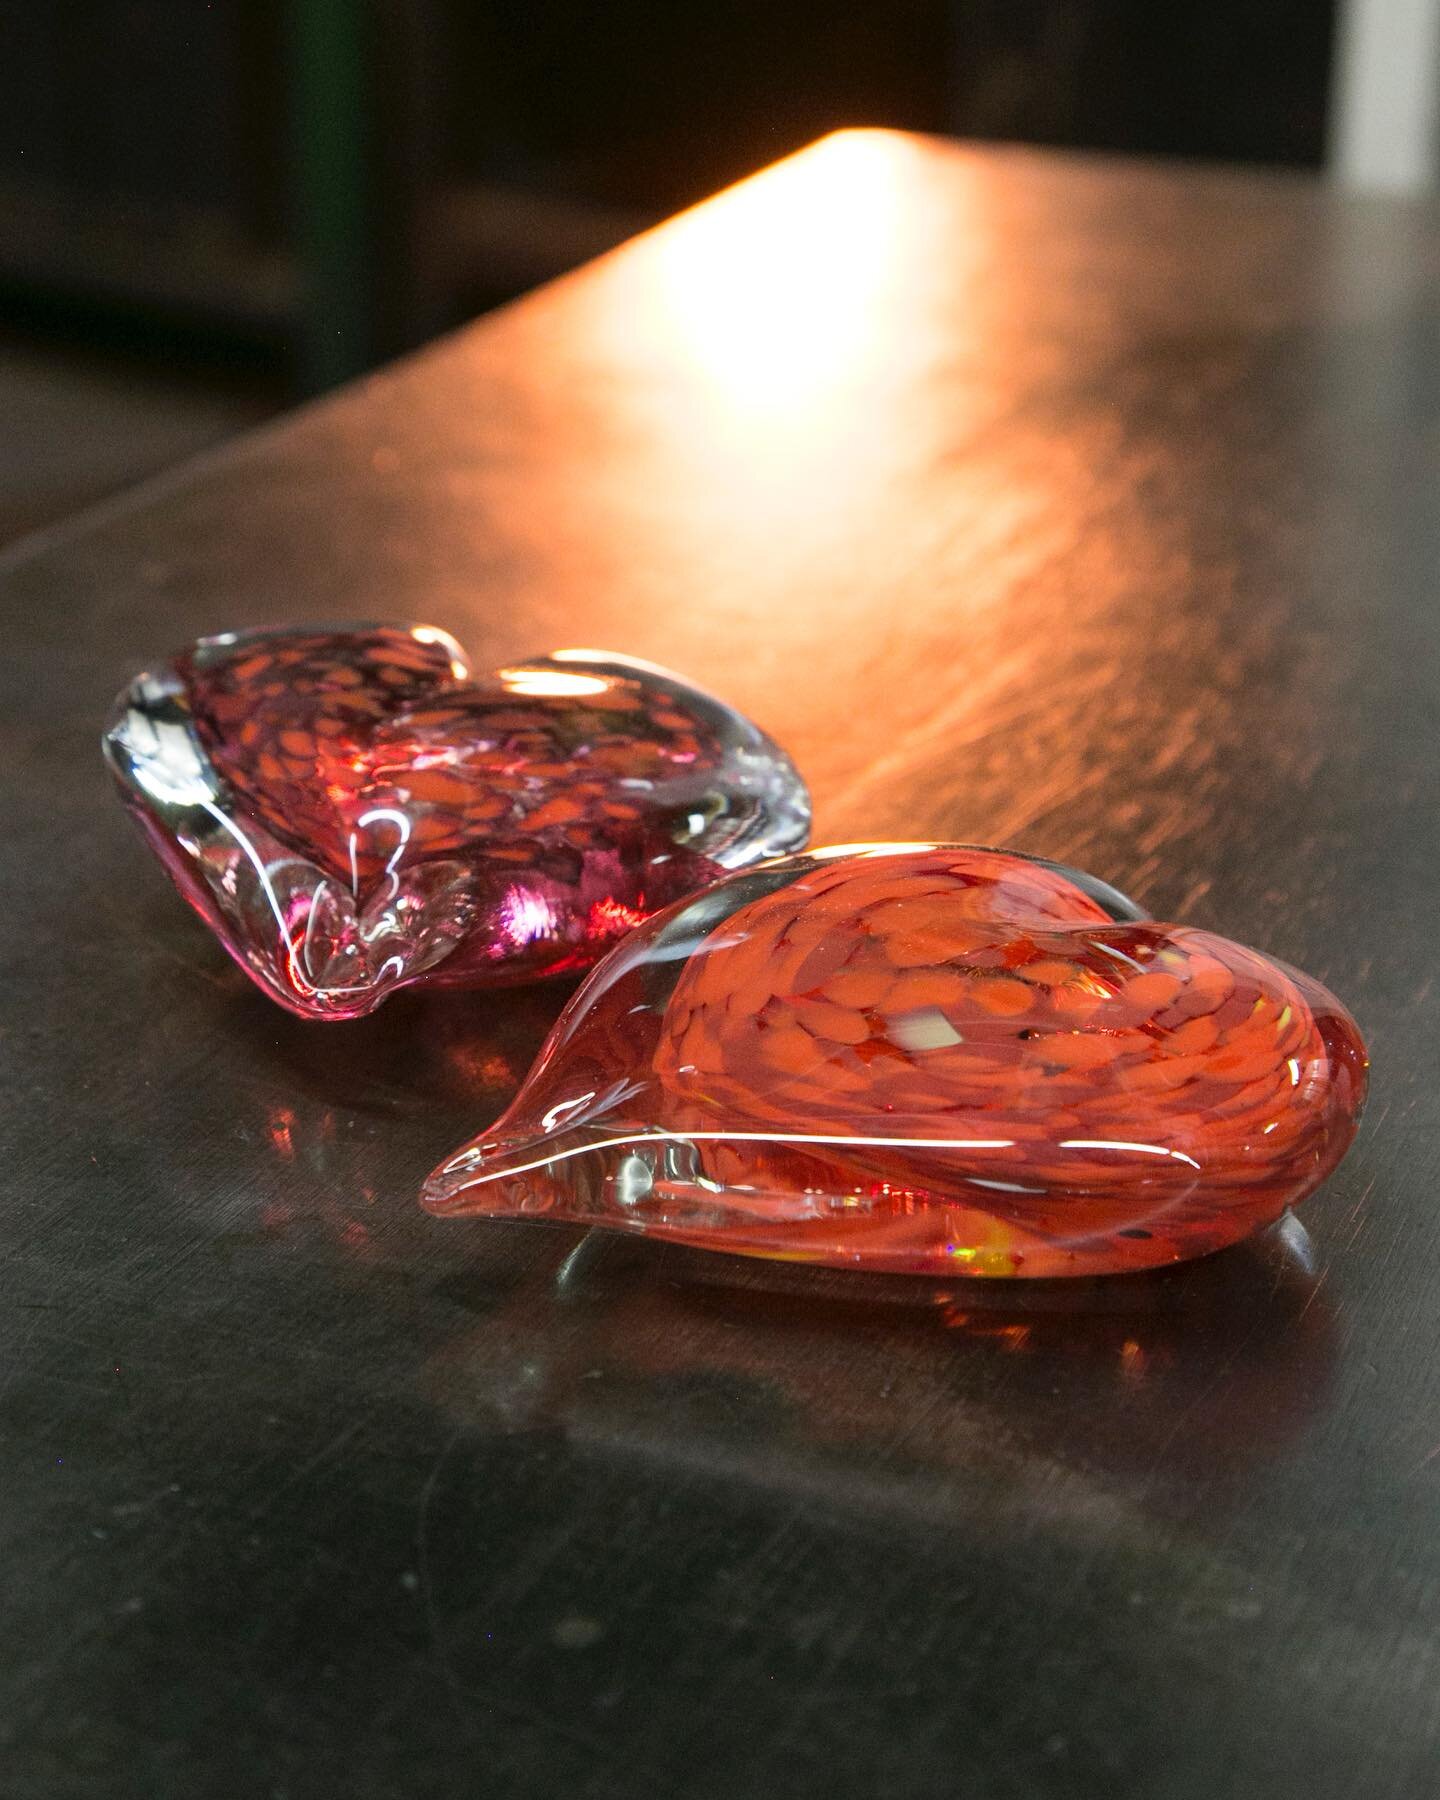 Book a Valentine&rsquo;s Date Night early and sign up for out Heart Paperweight Workshop running on Wednesday, February 14! Sign up using the link in bio.

Warm up in our hotshop and sculpt molten glass into the shape of a heart. No prior experience 